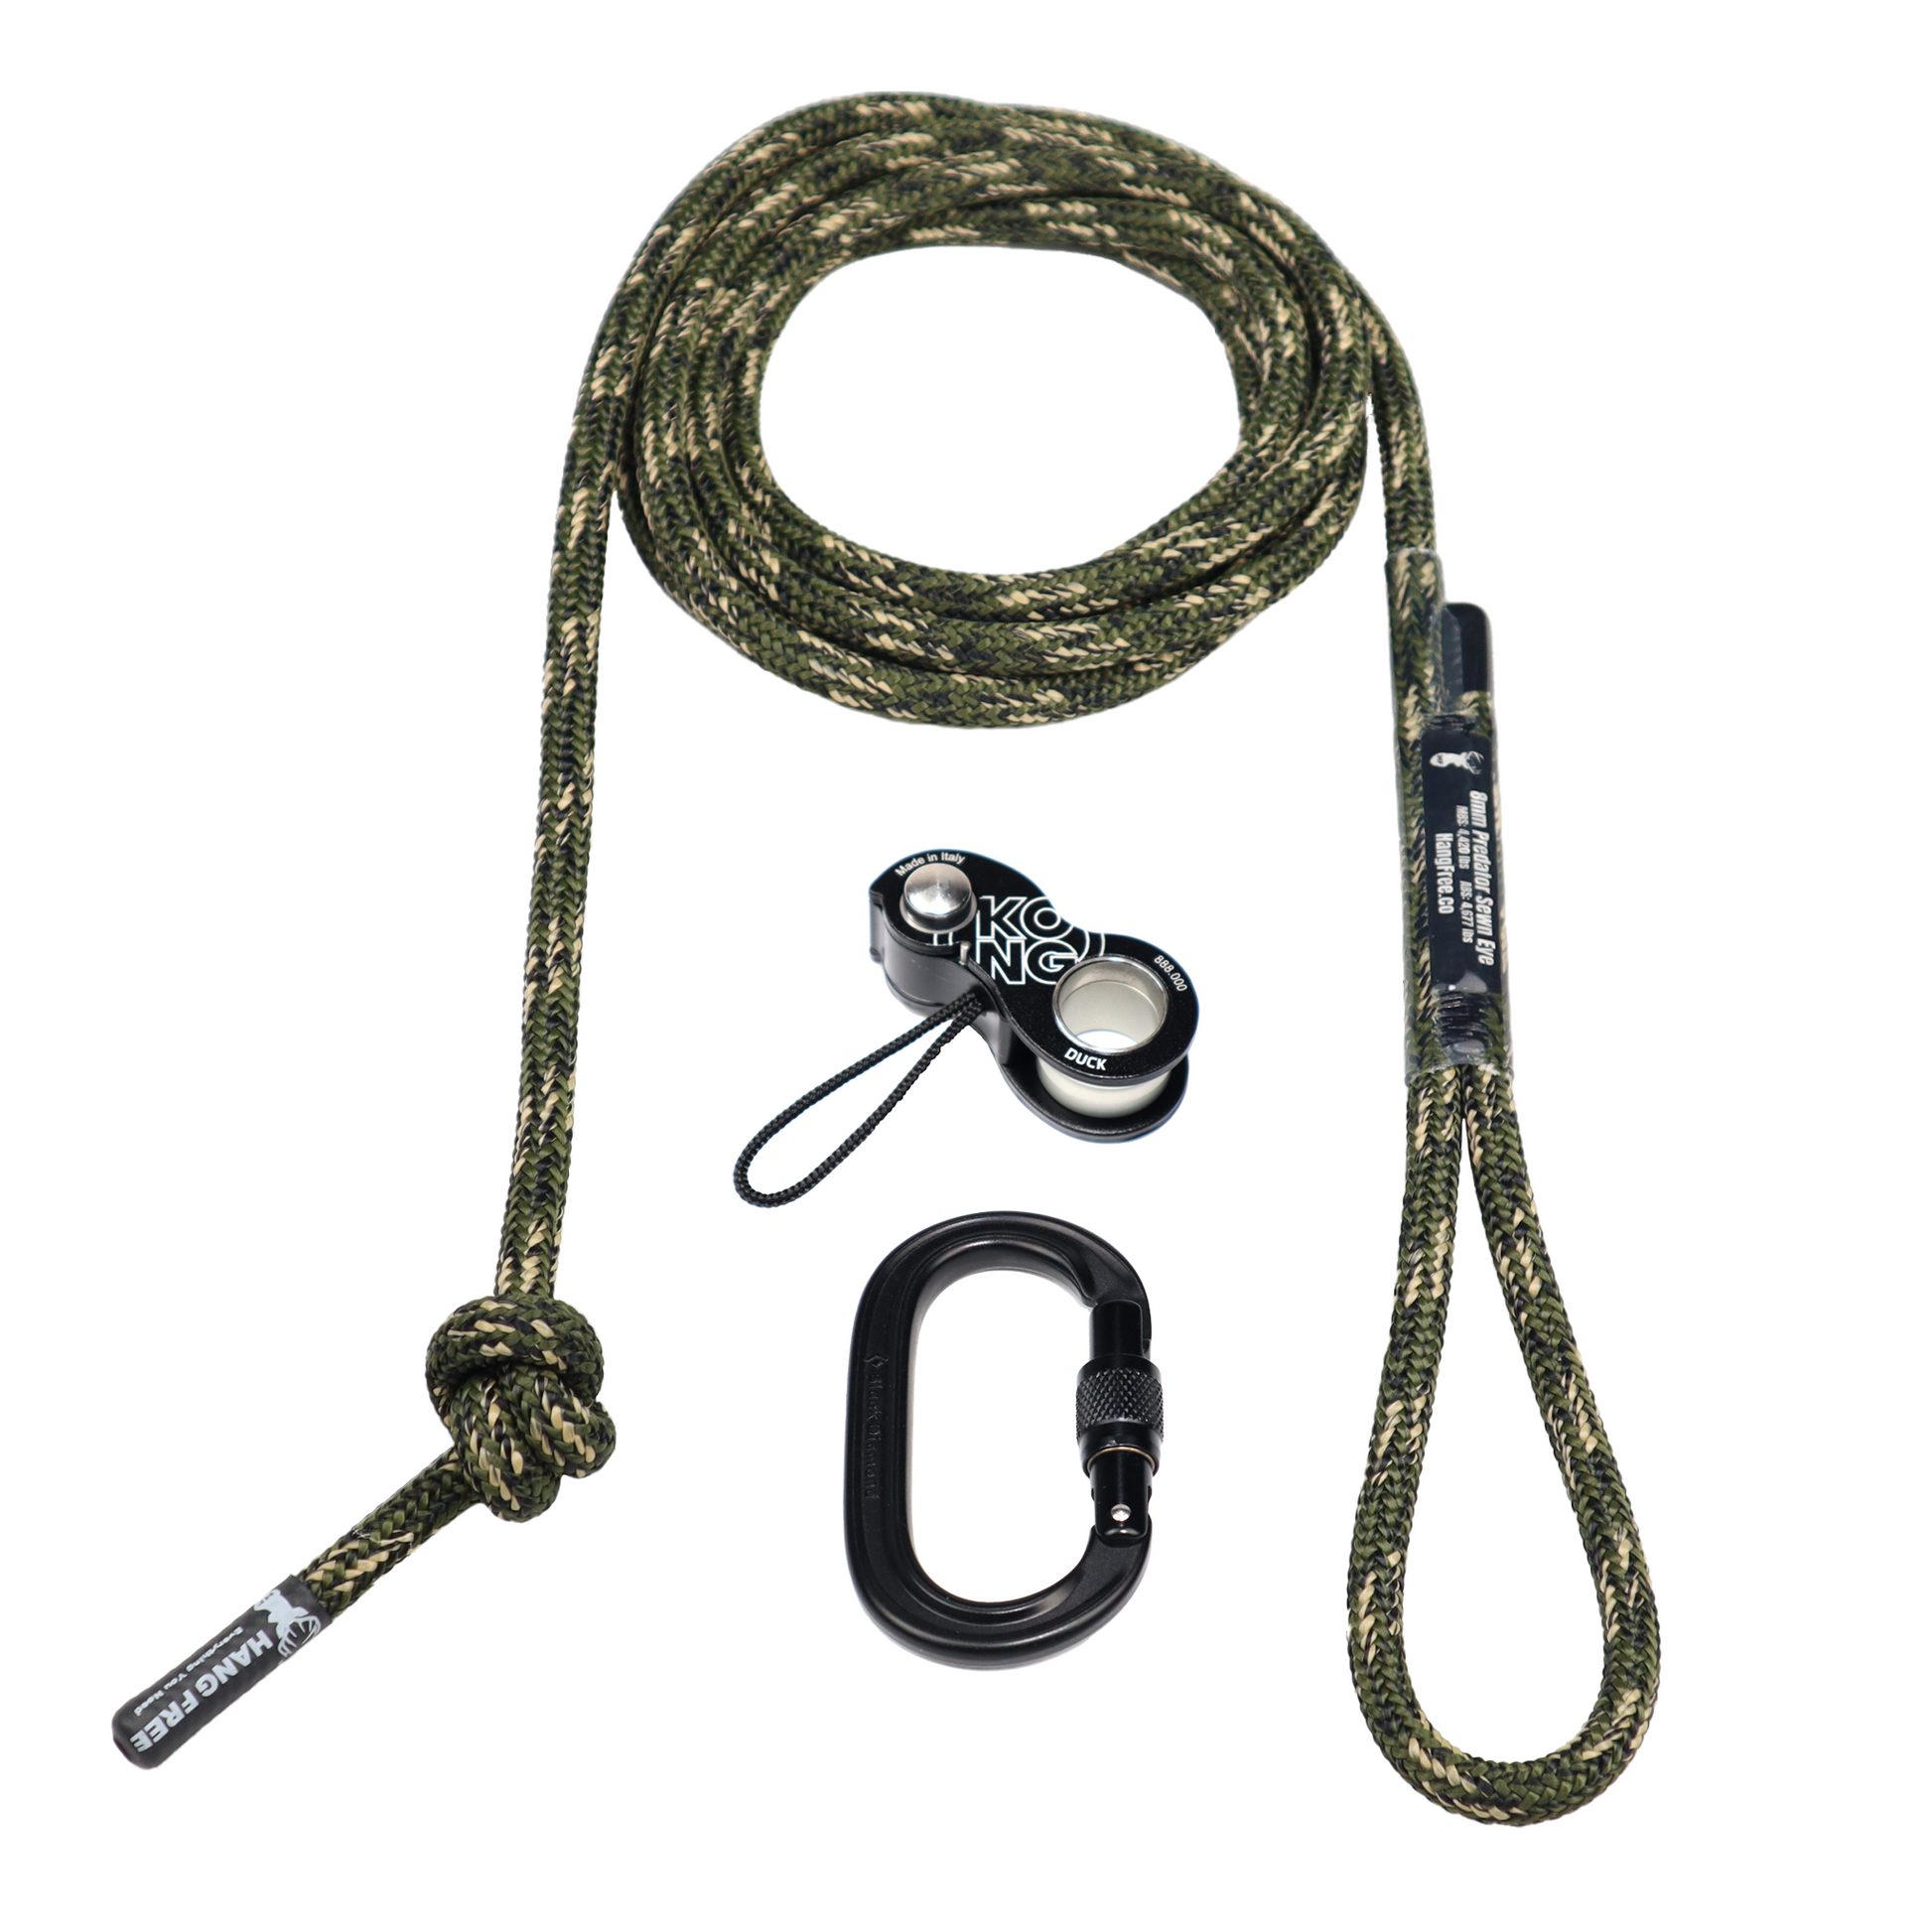 Sewn Deluxe Tree Tether in Predator Camo with Carabiner